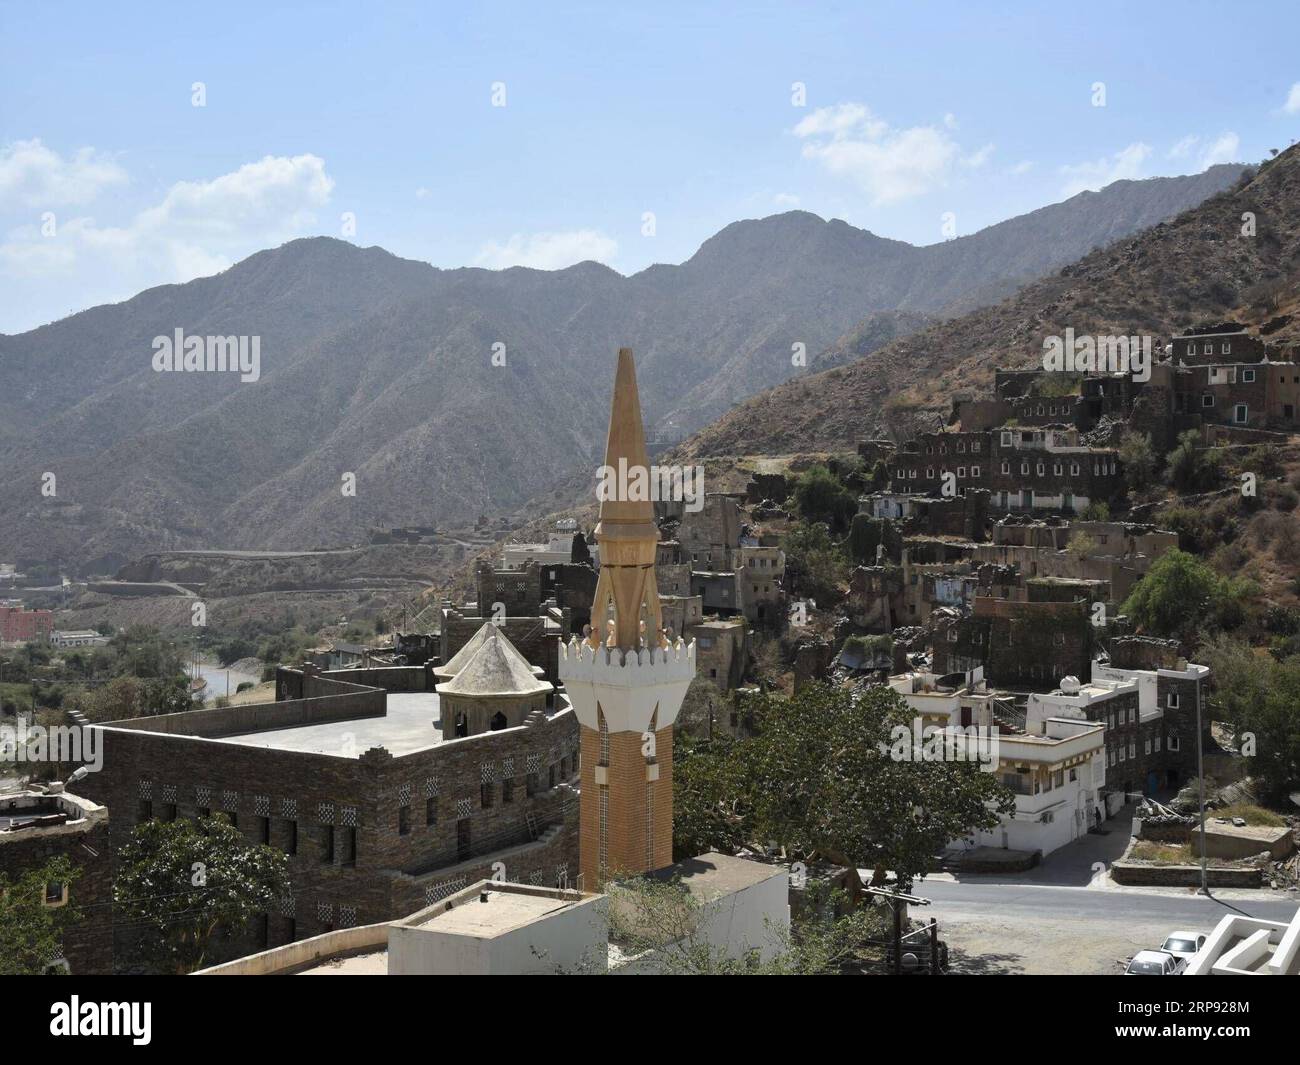 (190320) -- ABHA (SAUDI ARABIA), March 20, 2019 (Xinhua) -- The photo taken on March 20, 2019 shows the Rijal Almaa village, west of Abha city, Asir Province, Saudi Arabia. Rijal Almaa is an ancient village which contains around 60 multiple-story buildings built of stone, clay and wood. (Xinhua/Tu Yifan) SAUDI ARABIA-ABHA-VILLAGE-RIJAL ALMAA PUBLICATIONxNOTxINxCHN Stock Photo